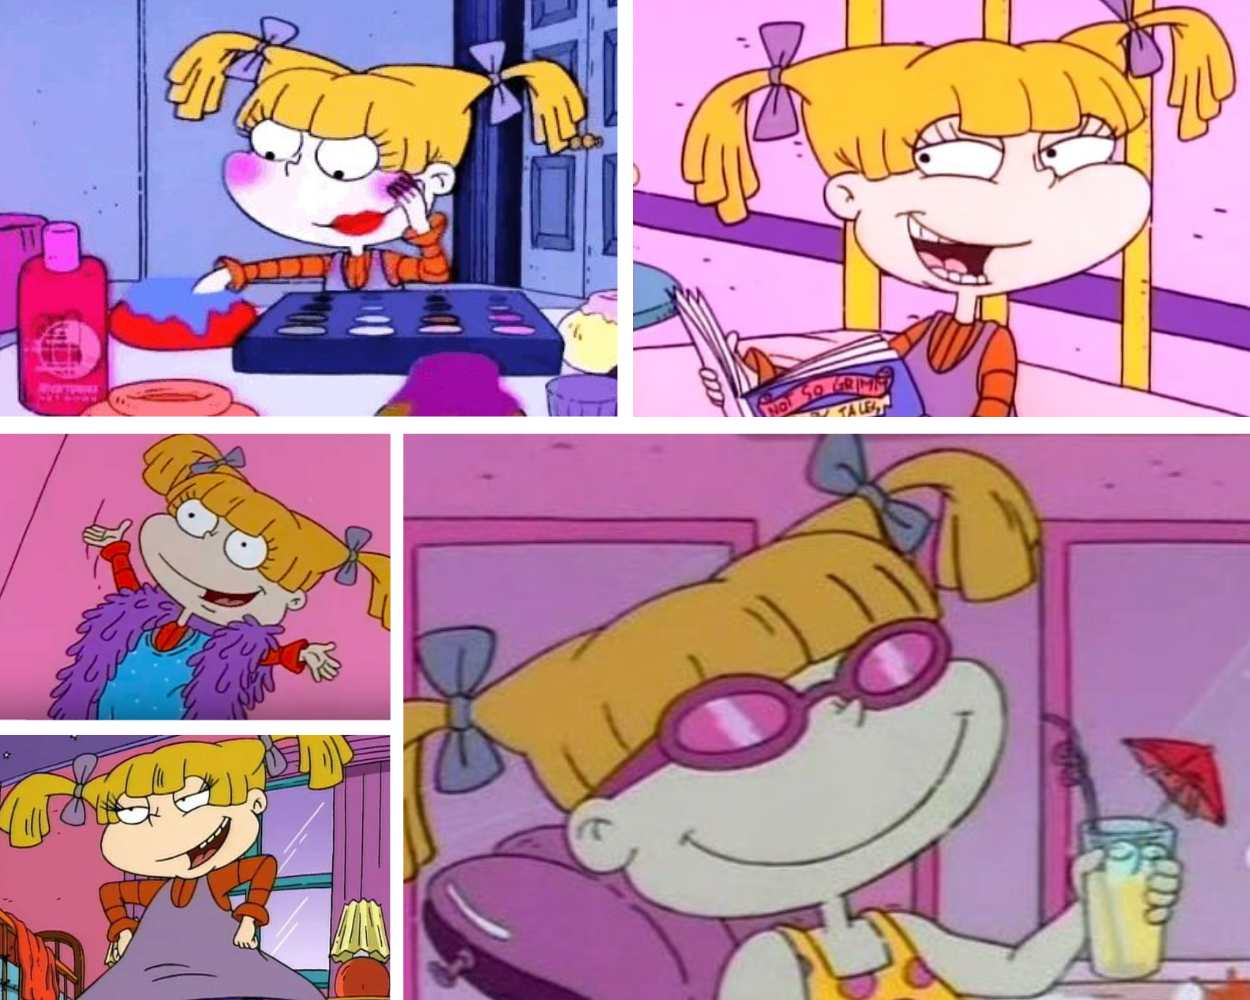 Angelica Pickles from Rugrats